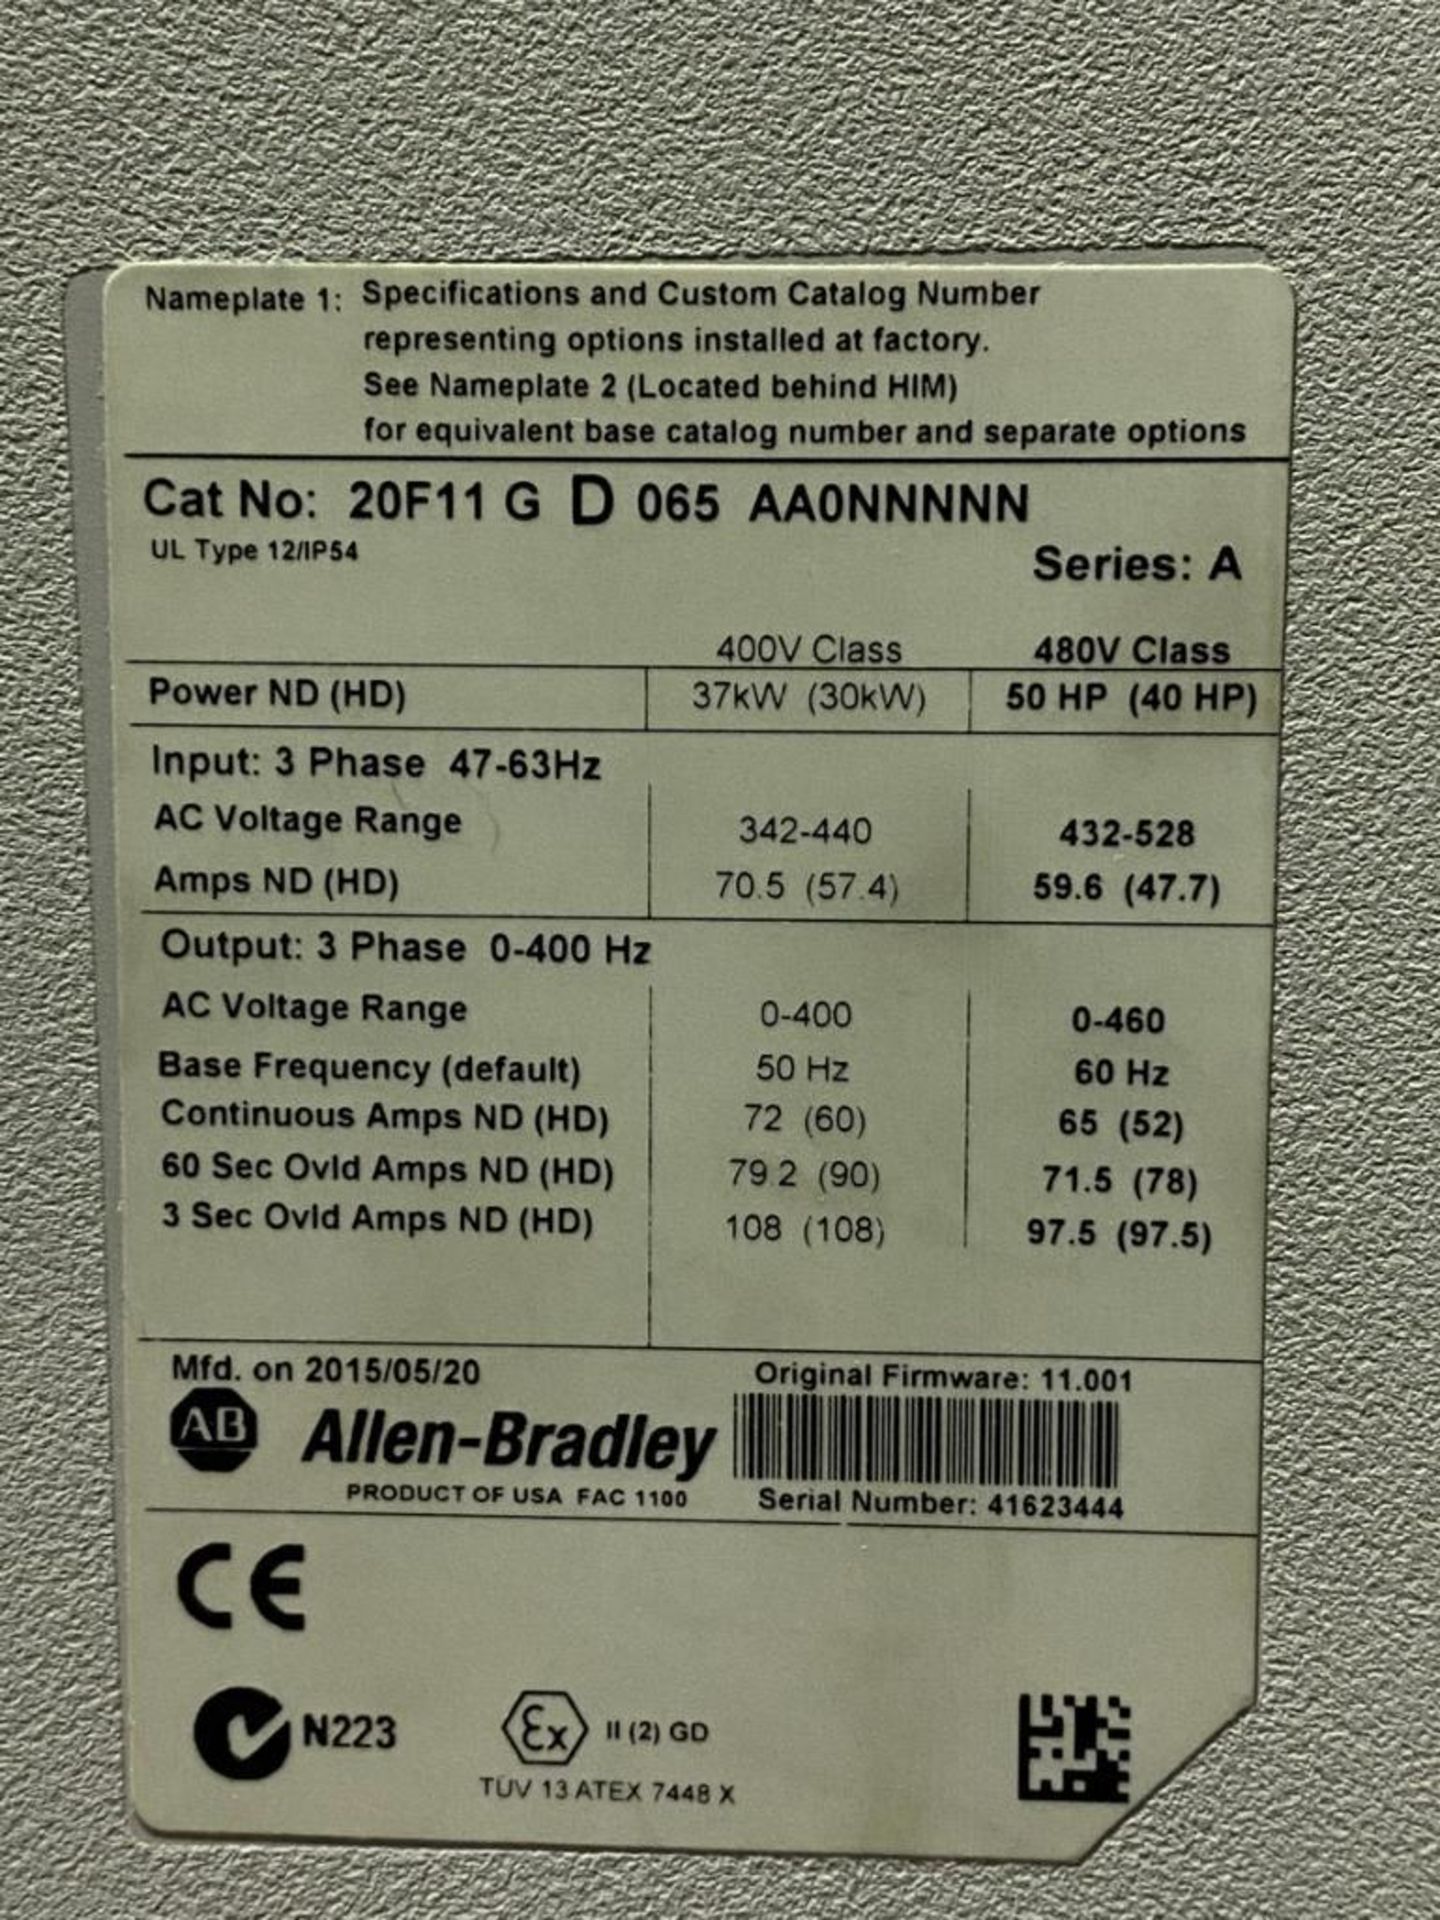 Allen-Bradley Cat No. 20F11GD065 PowerFlex 753 50 HP Variable Frequency Drive - Image 3 of 3